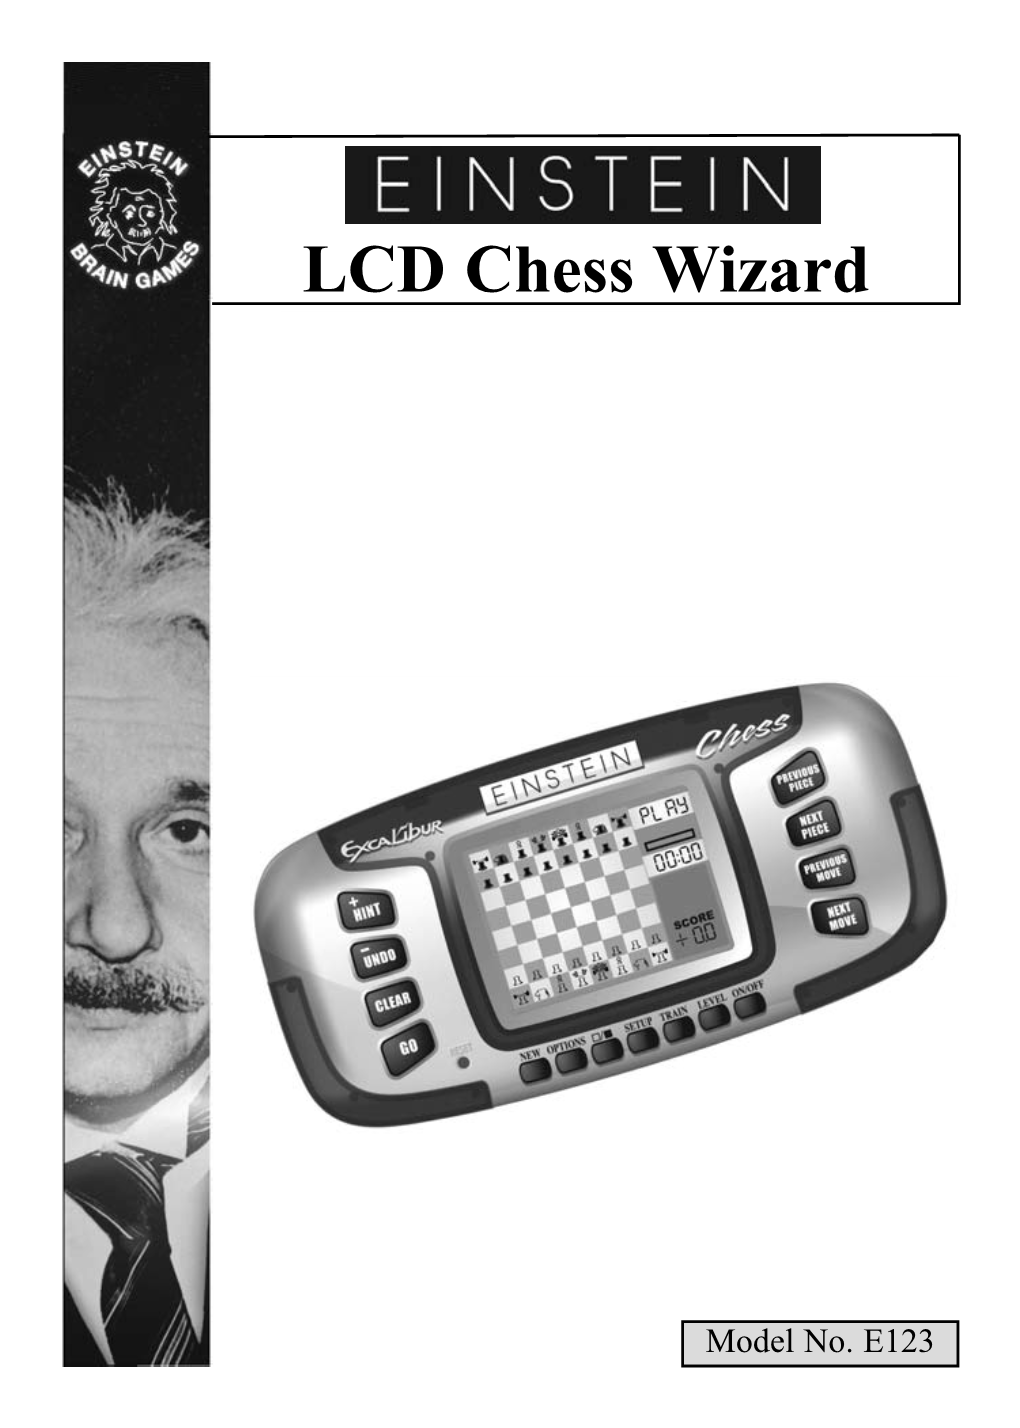 LCD Chess Wizard